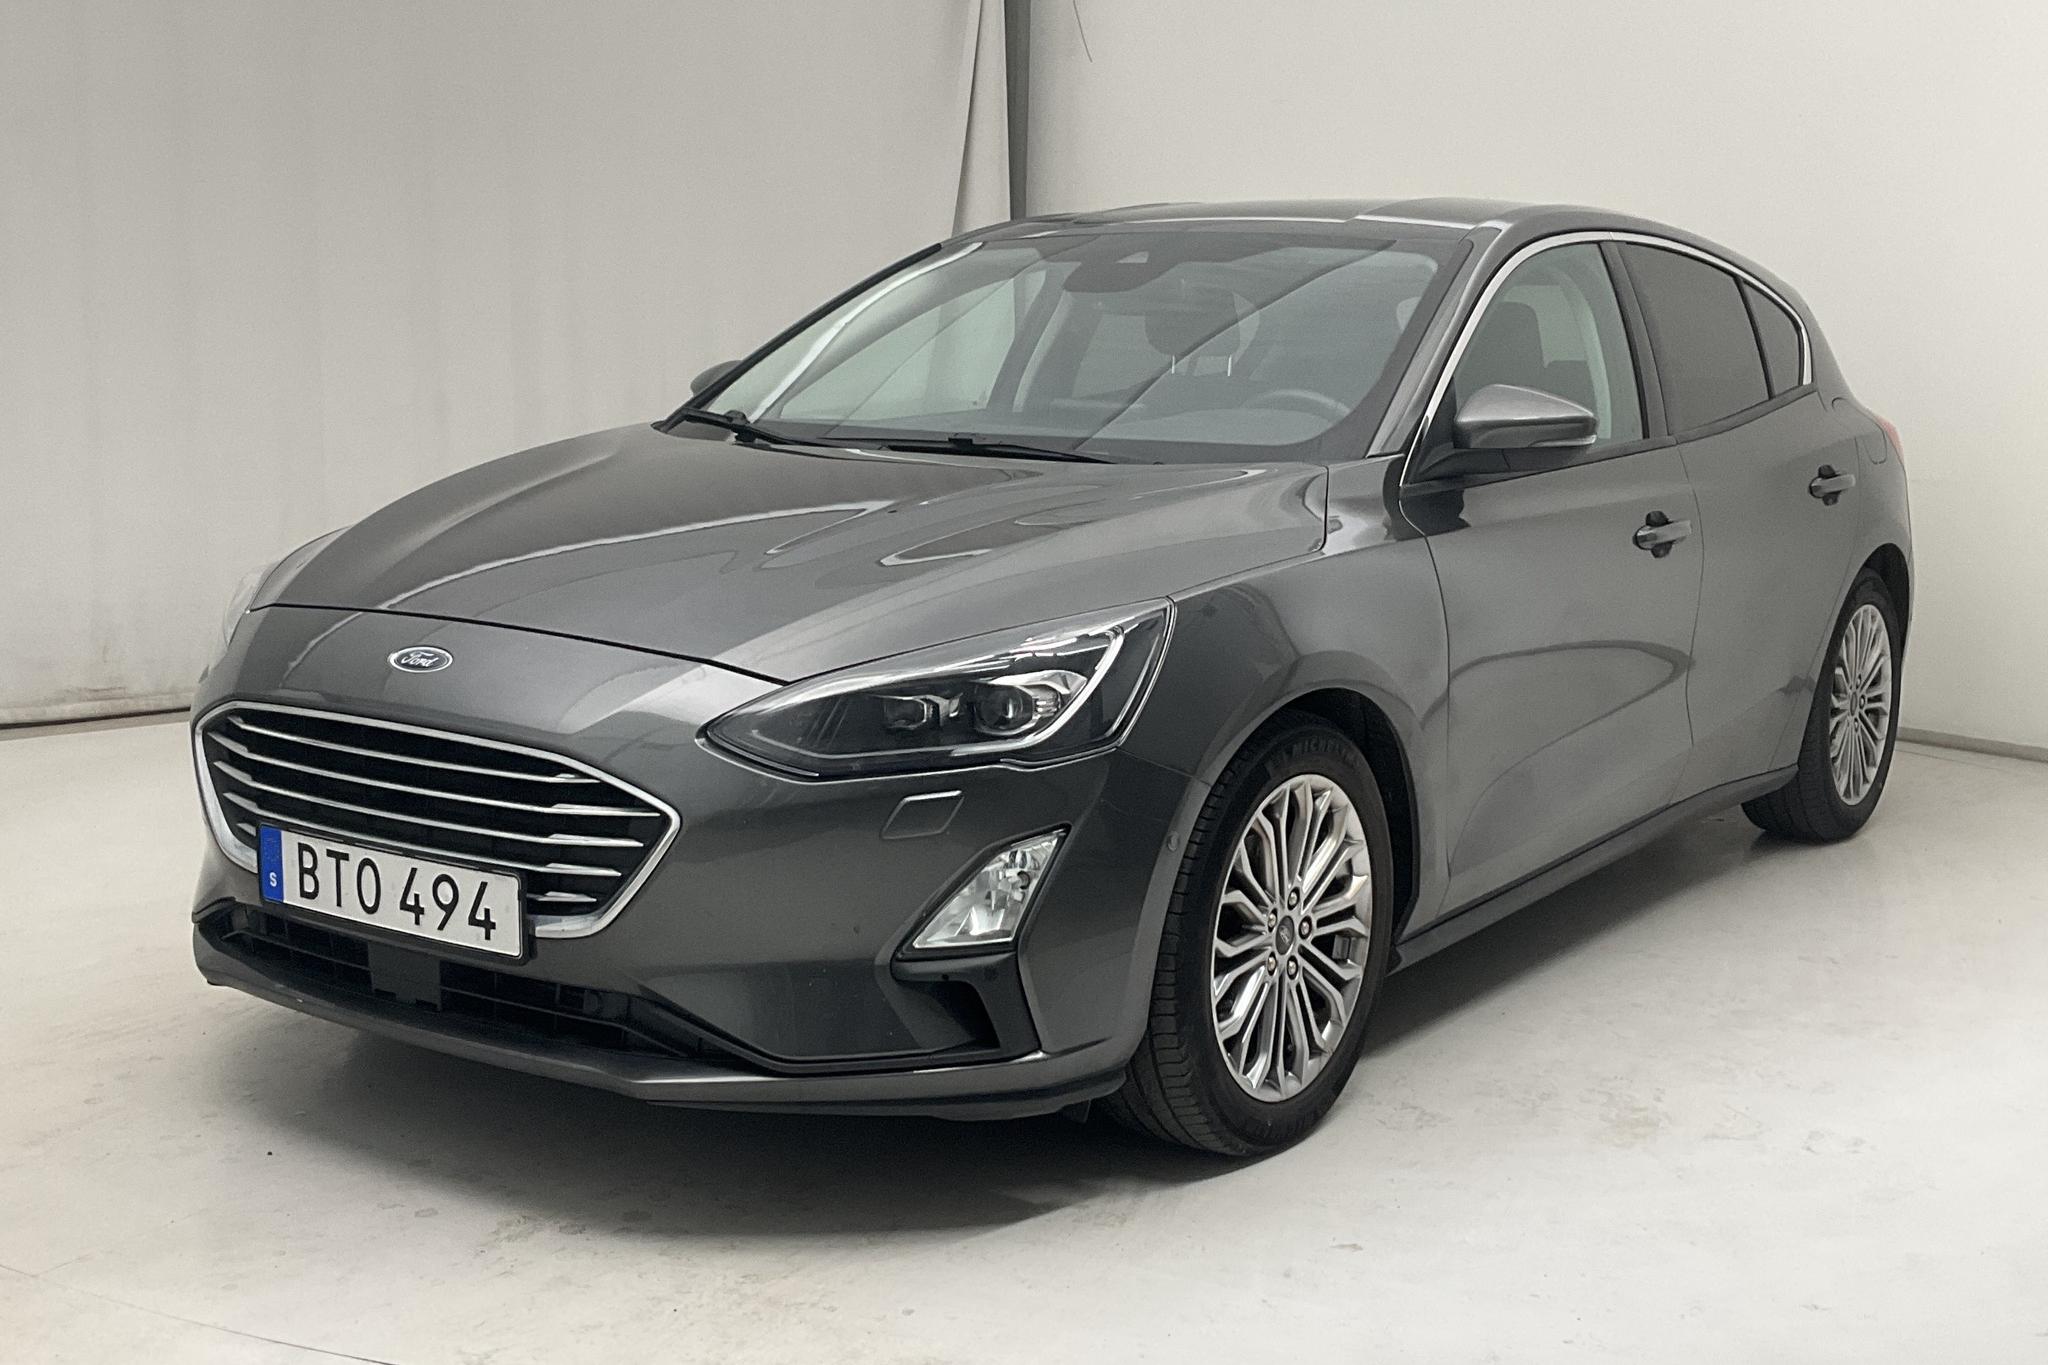 Ford Focus 1.0T EcoBoost 5dr (125hk) - 50 900 km - Manual - gray - 2019